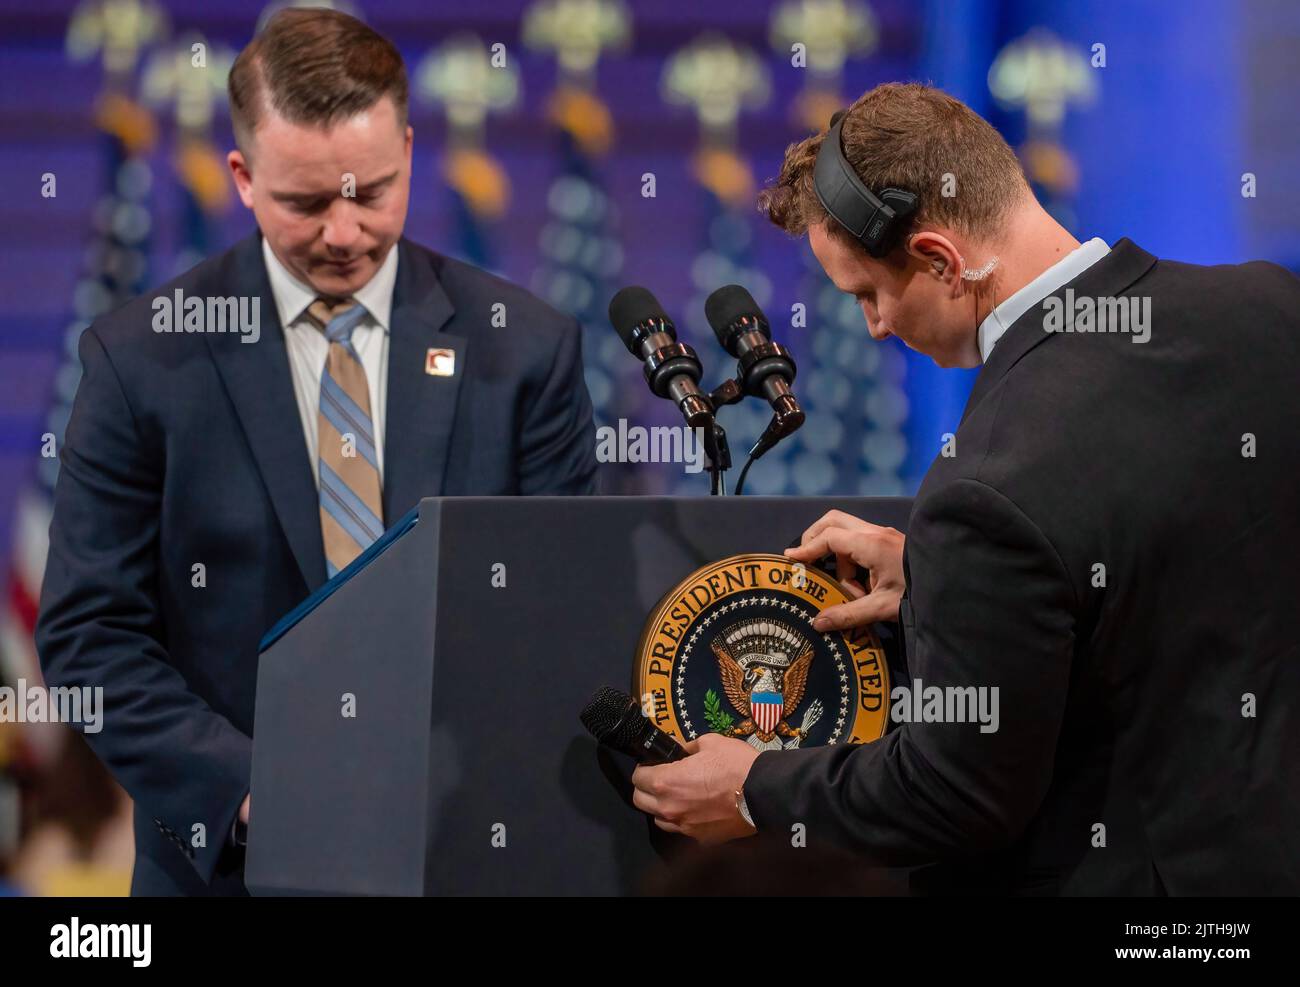 Wilkes Barre, United States. 30th Aug, 2022. White House employees place the presidential seal and notes on the podium. President Joe Biden made a visit to Wilkes-Barre, Pennsylvania to discuss his plan to reform gun control, during his speech he touted beating the NRA. Biden is visiting cities for his Safer America plan. (Photo by Aimee Dilger/SOPA Images/Sipa USA) Credit: Sipa USA/Alamy Live News Stock Photo